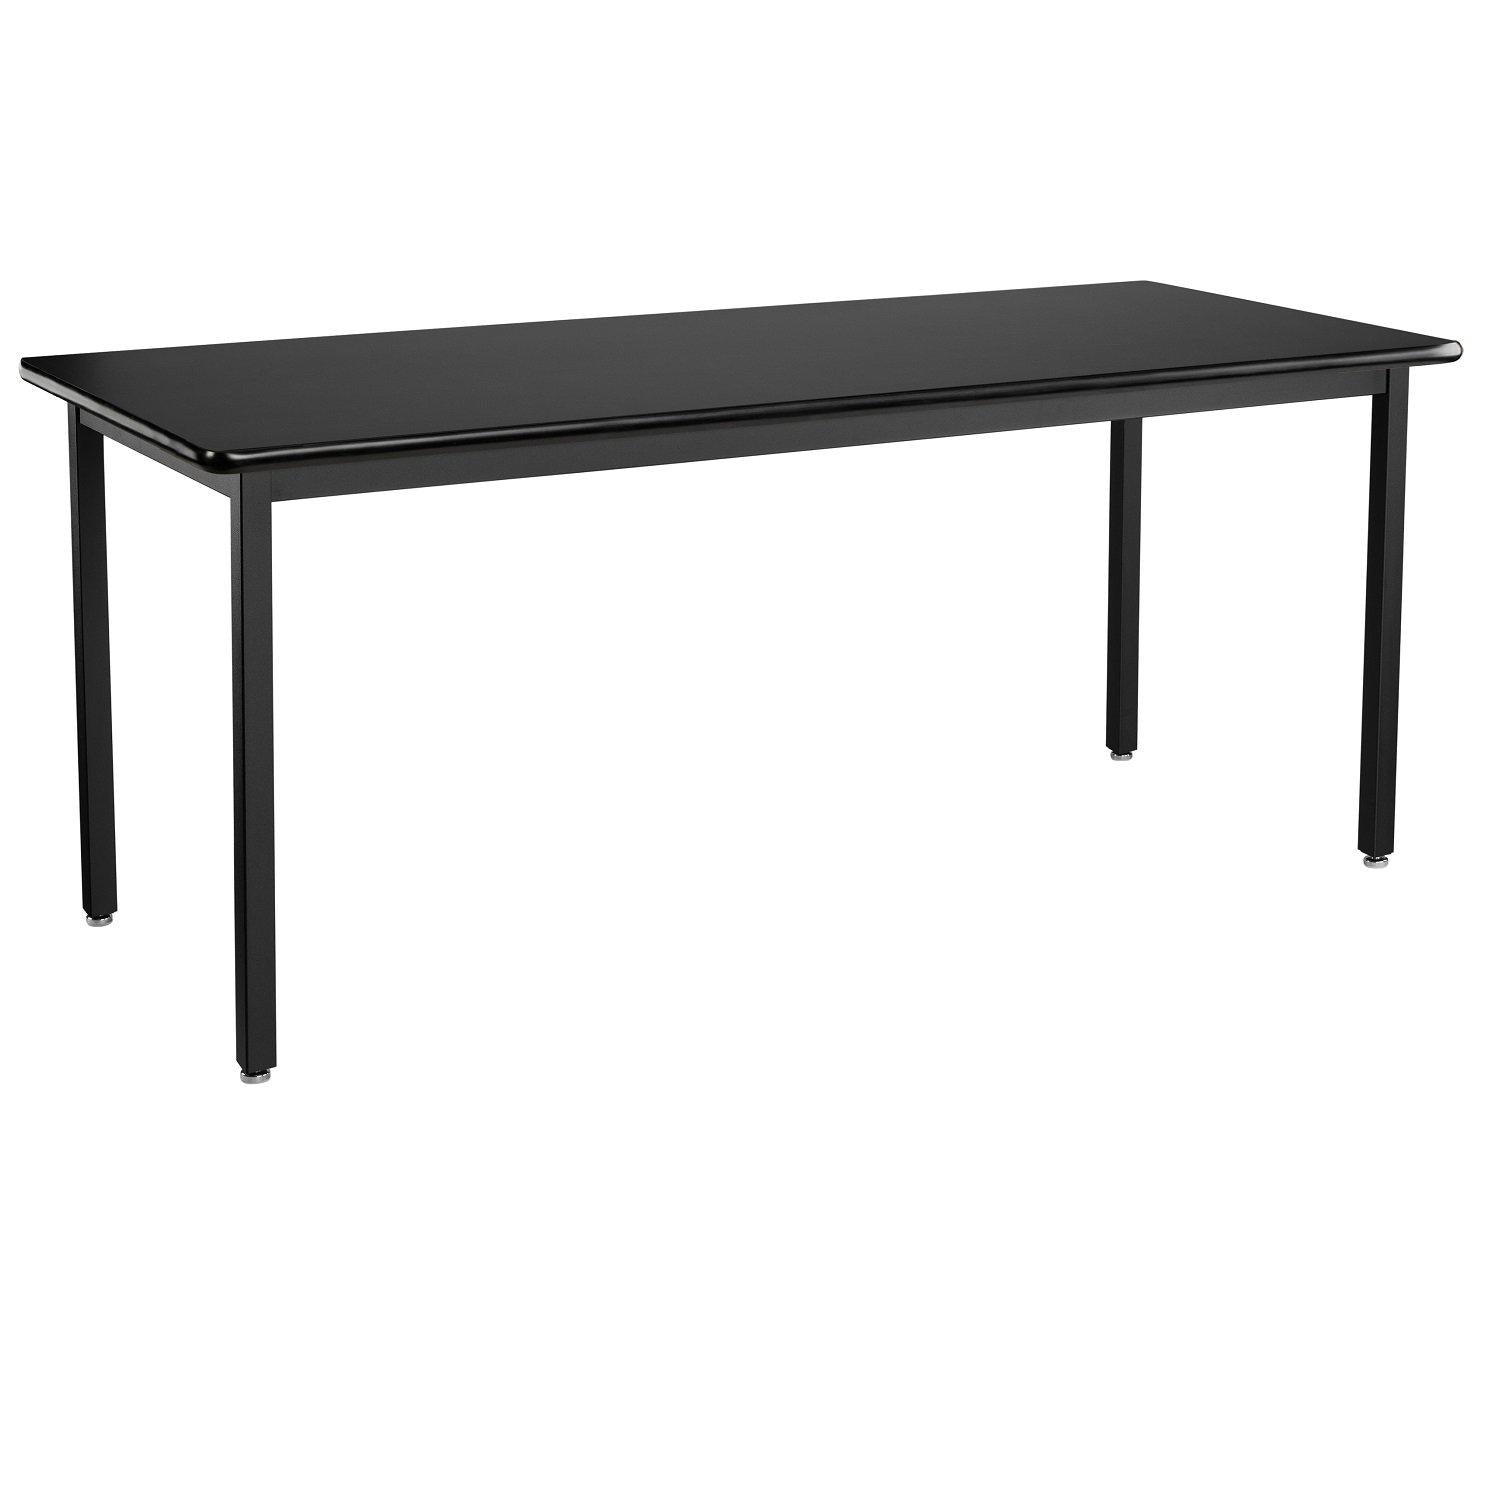 Heavy-Duty Fixed Height Utility Table, Black Frame, 24" x 96", High-Pressure Laminate Top with T-Mold Edge